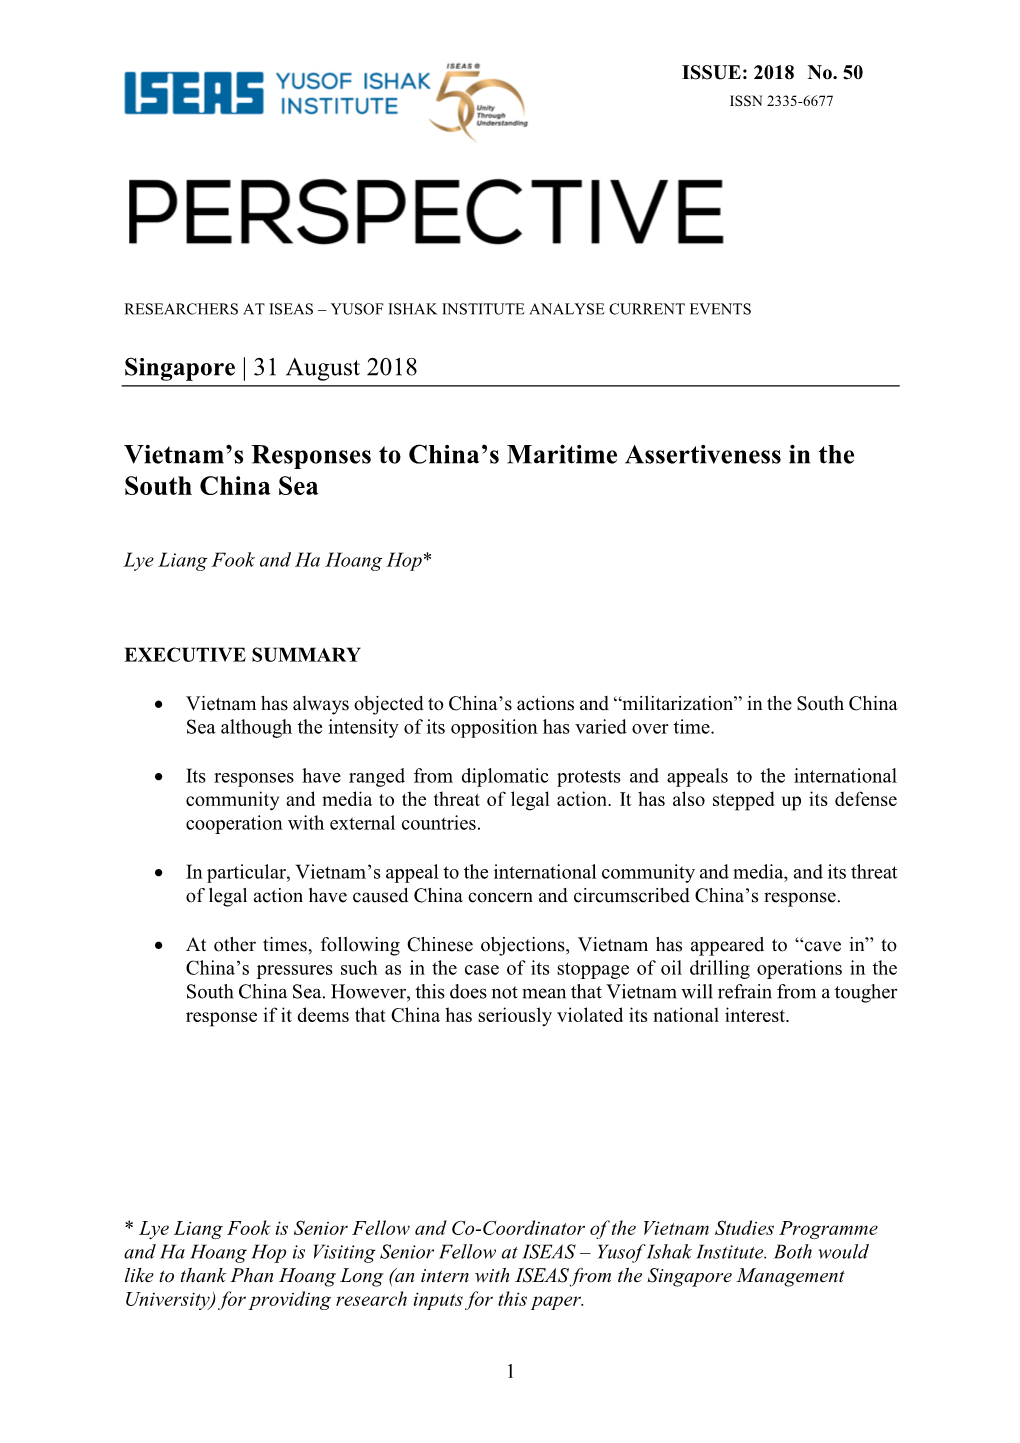 Vietnam's Responses to China's Maritime Assertiveness in the South